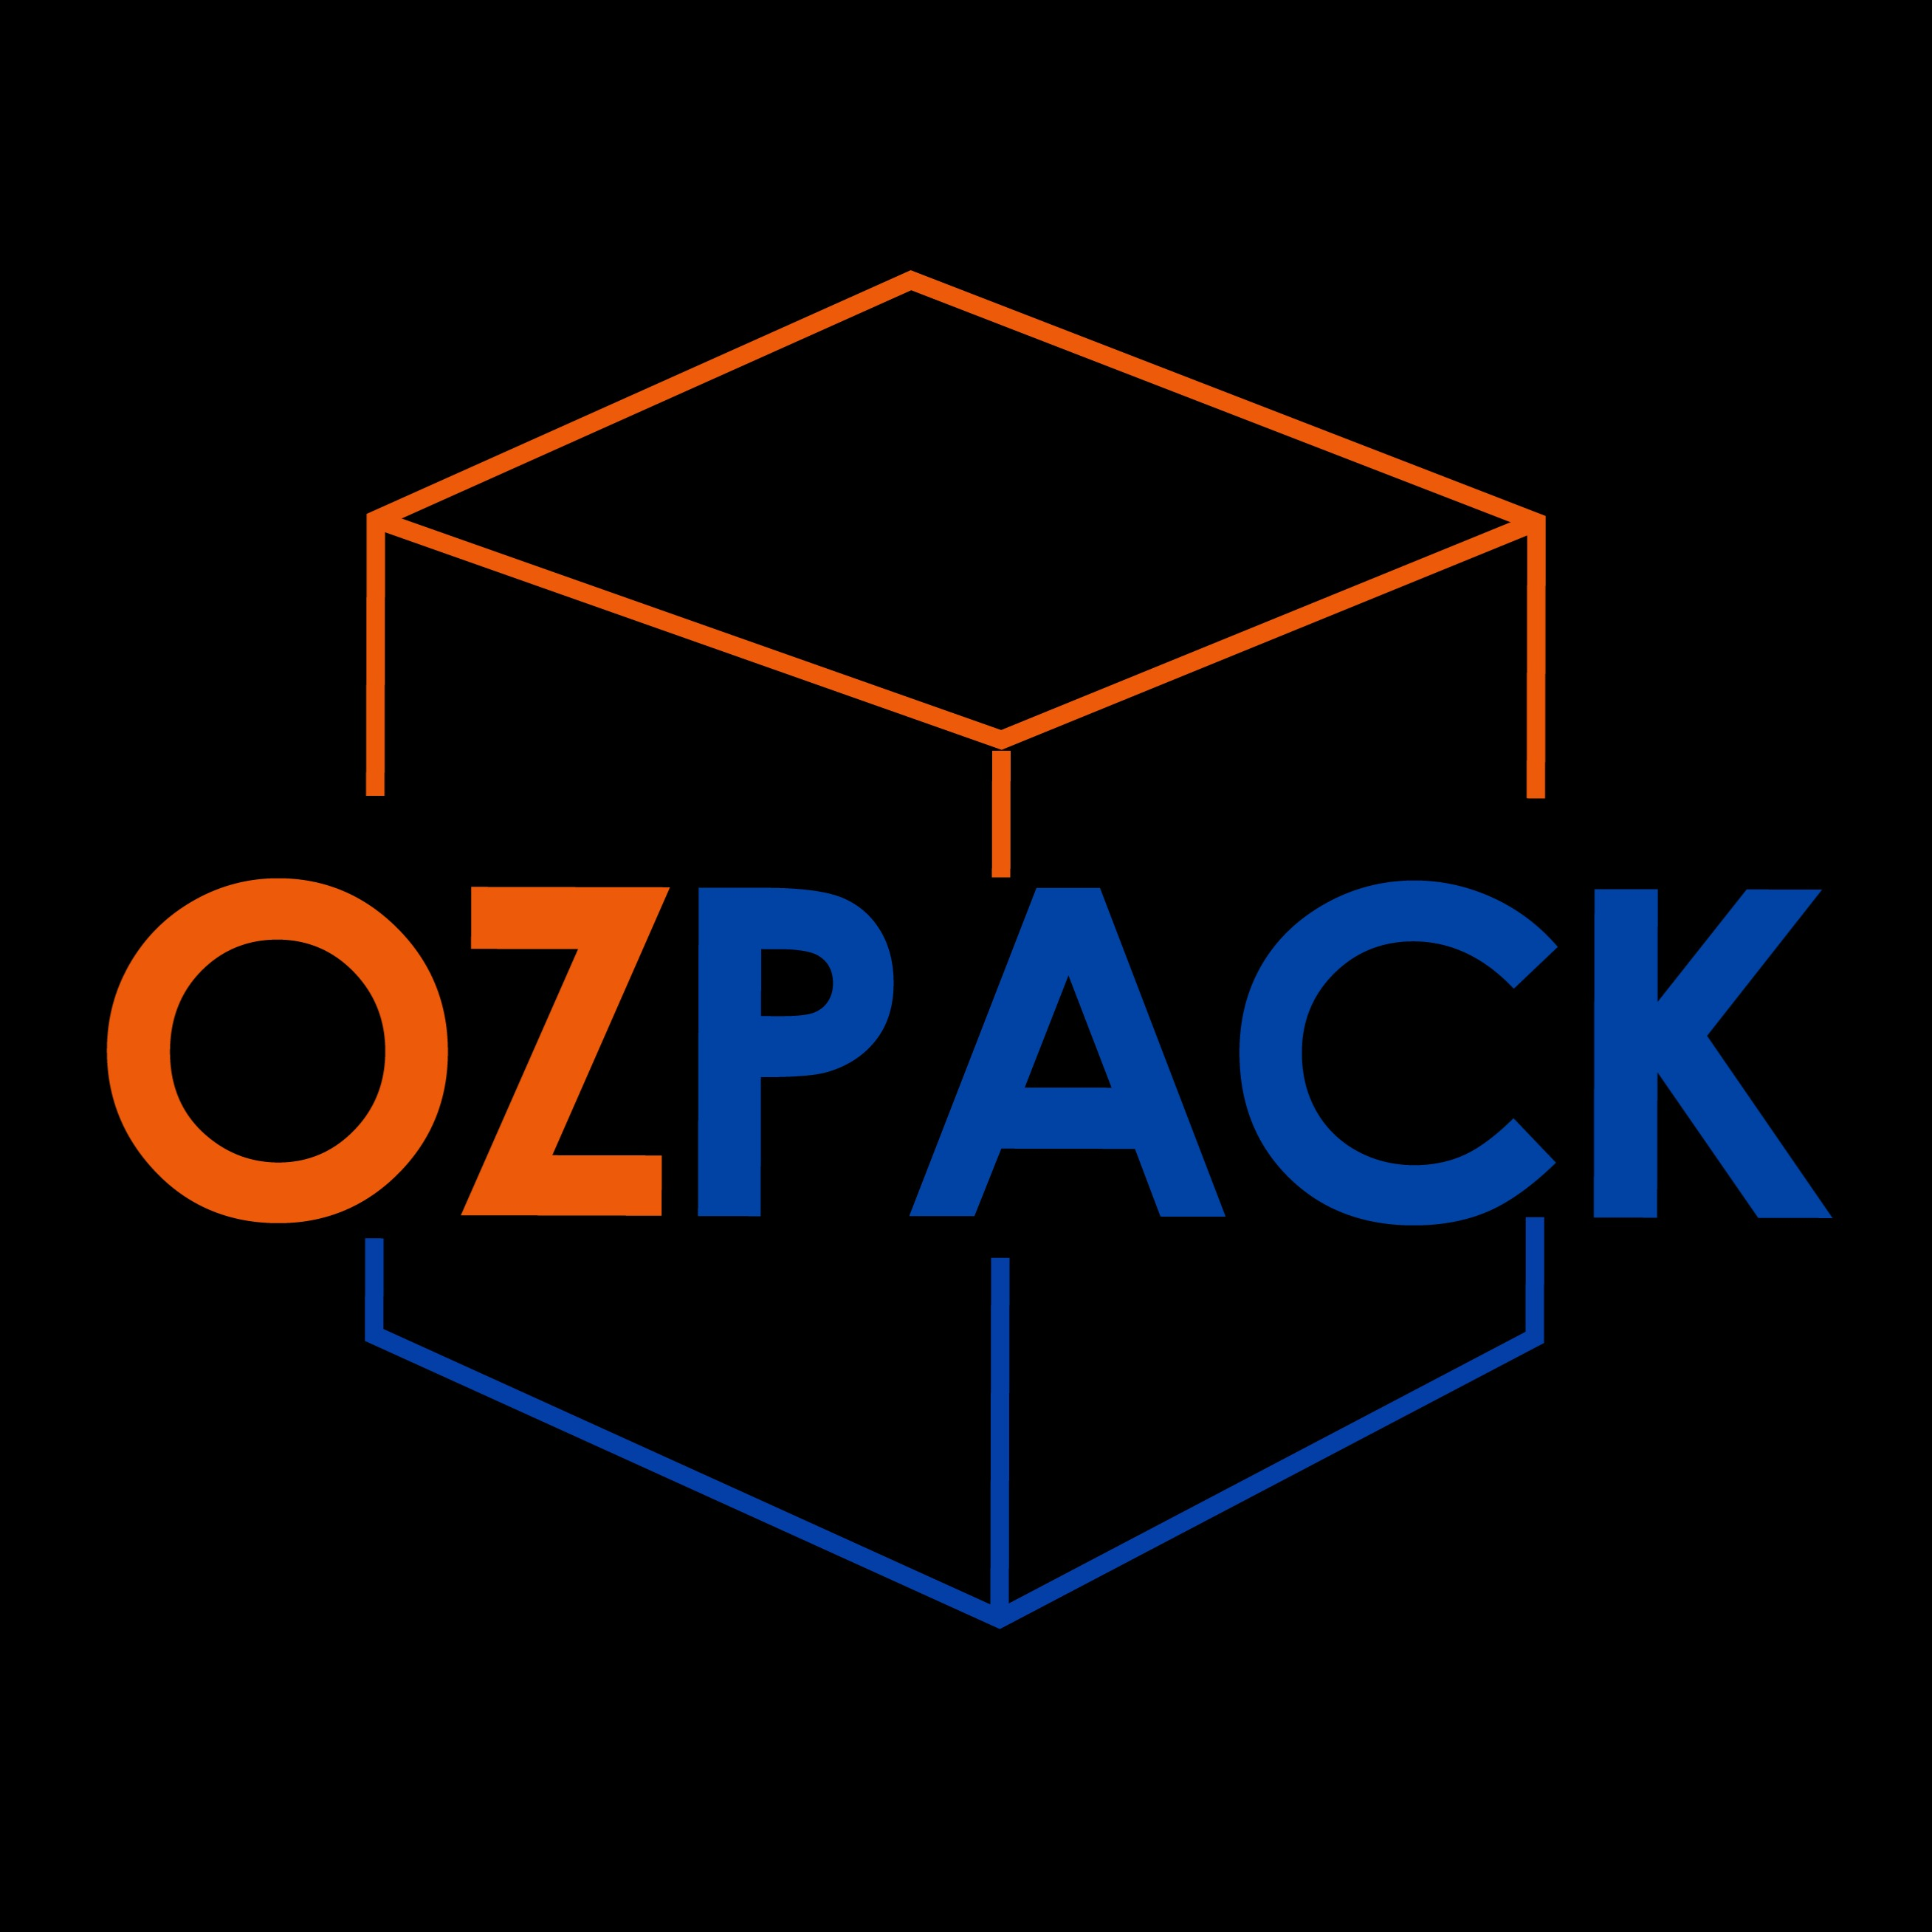 Ozpack Packaging Solution - Silverwater, NSW 2128 - (02) 8021 6052 | ShowMeLocal.com